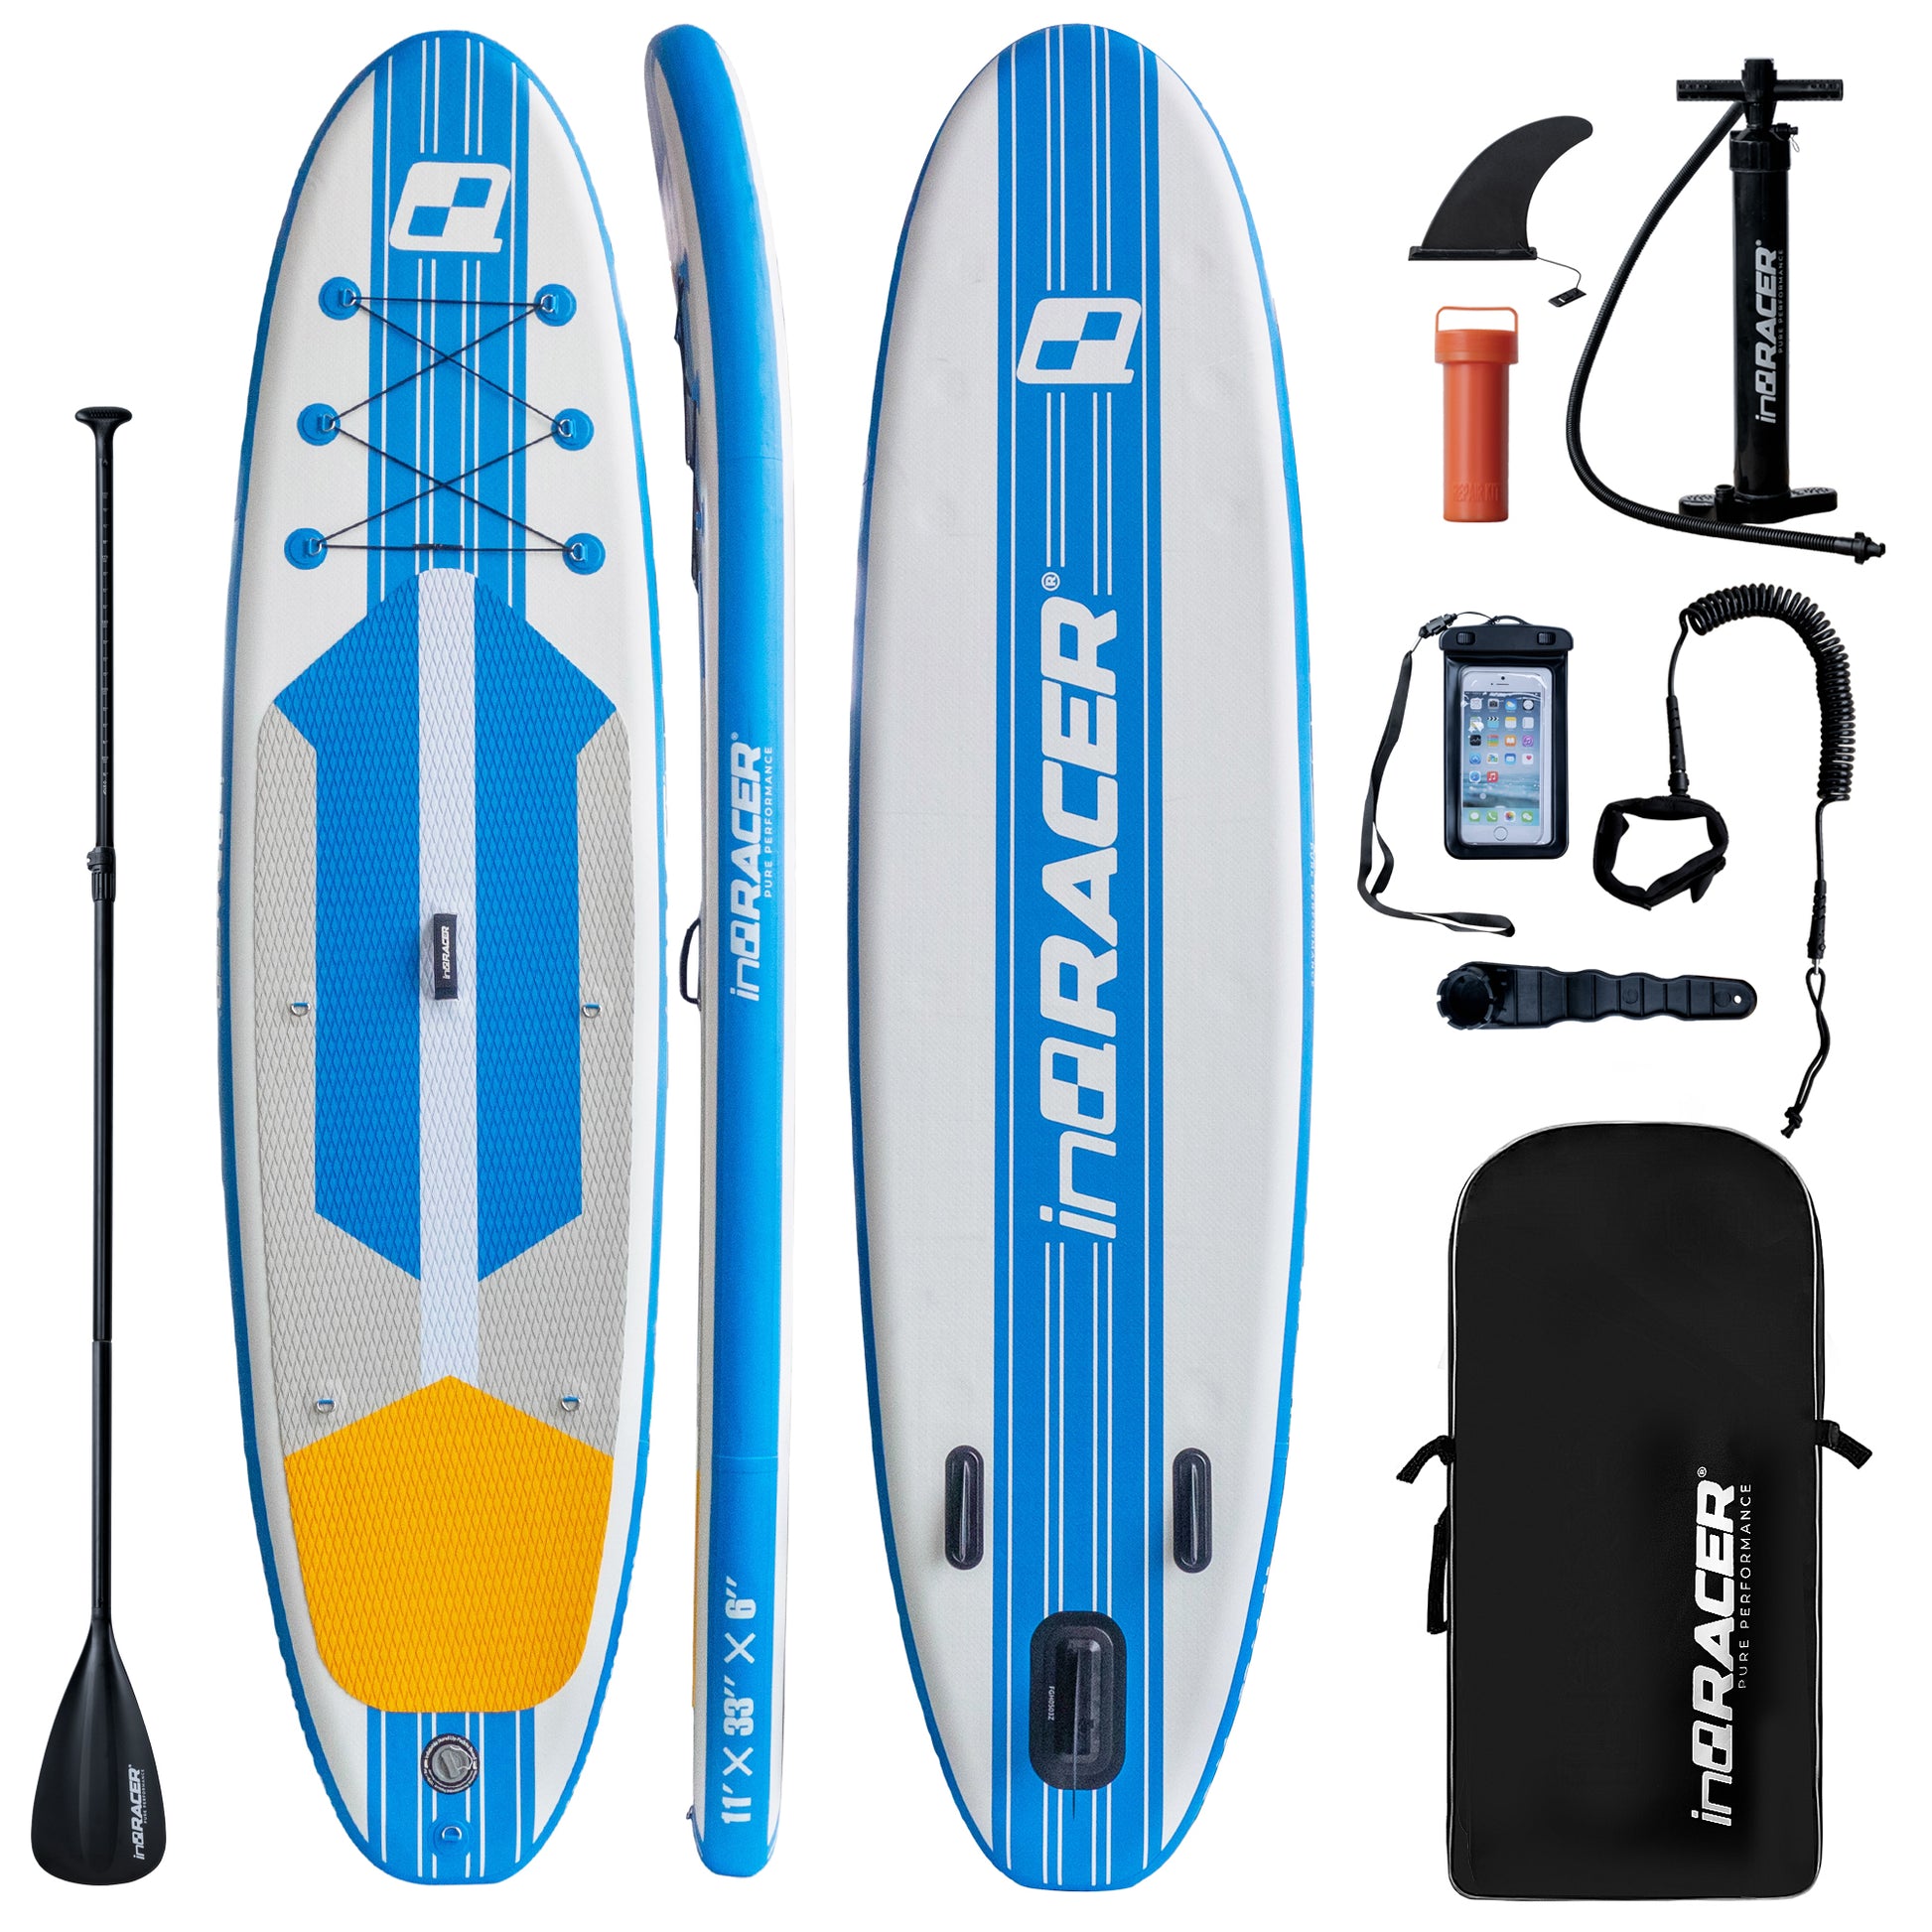 inQracer 11' 10'6" Inflatable Stand Up Paddle